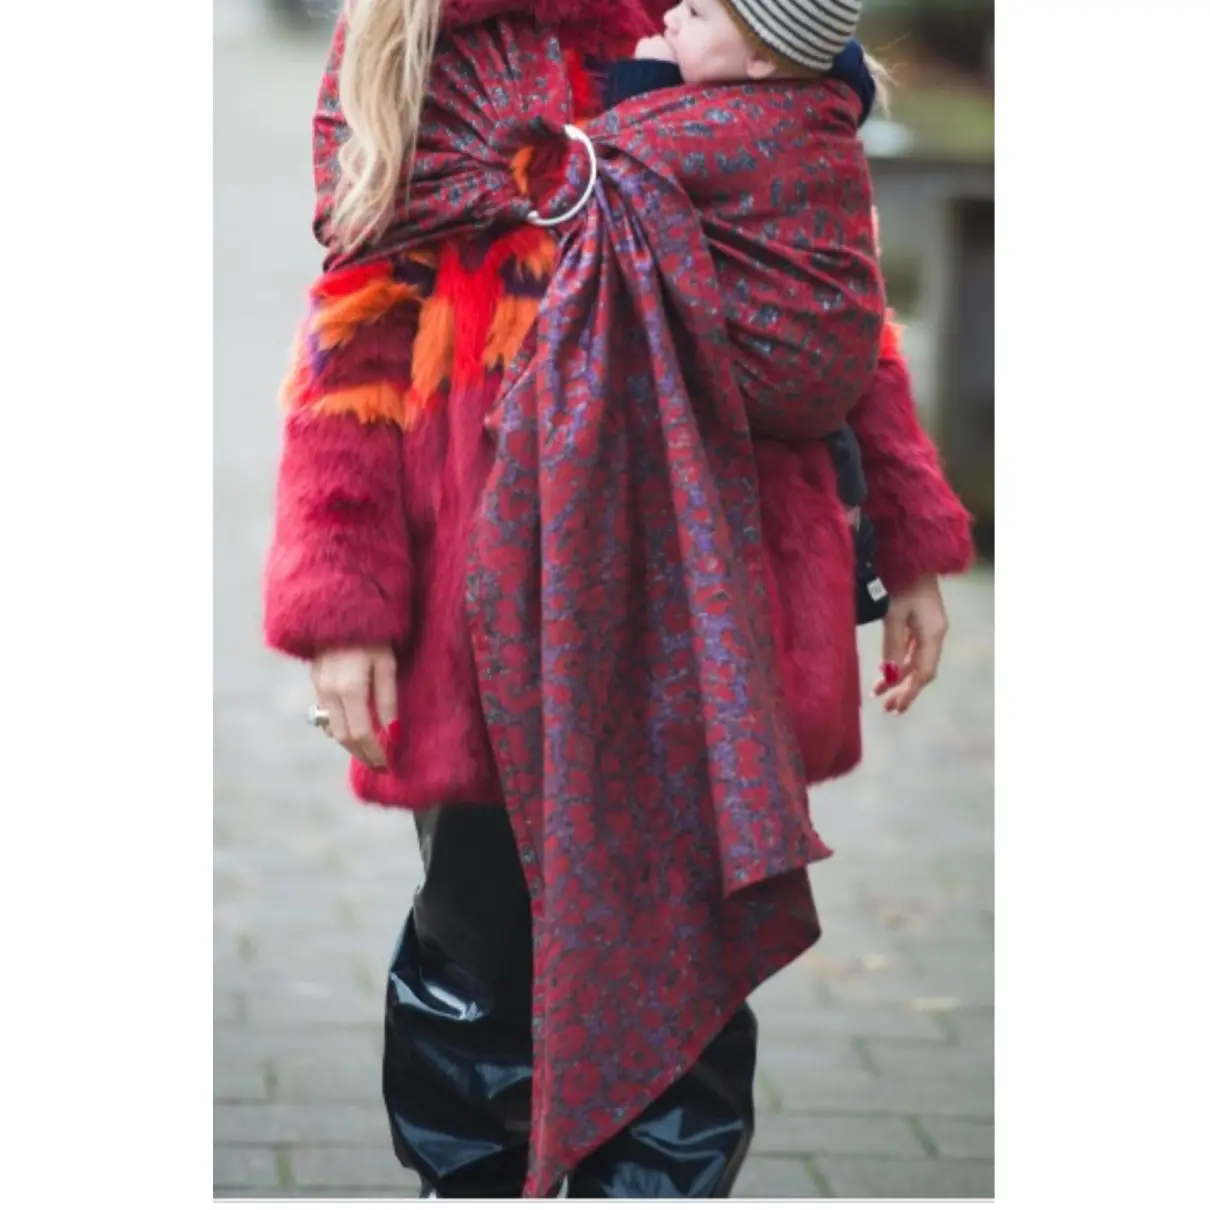 Buy Artipoppe Scarf online